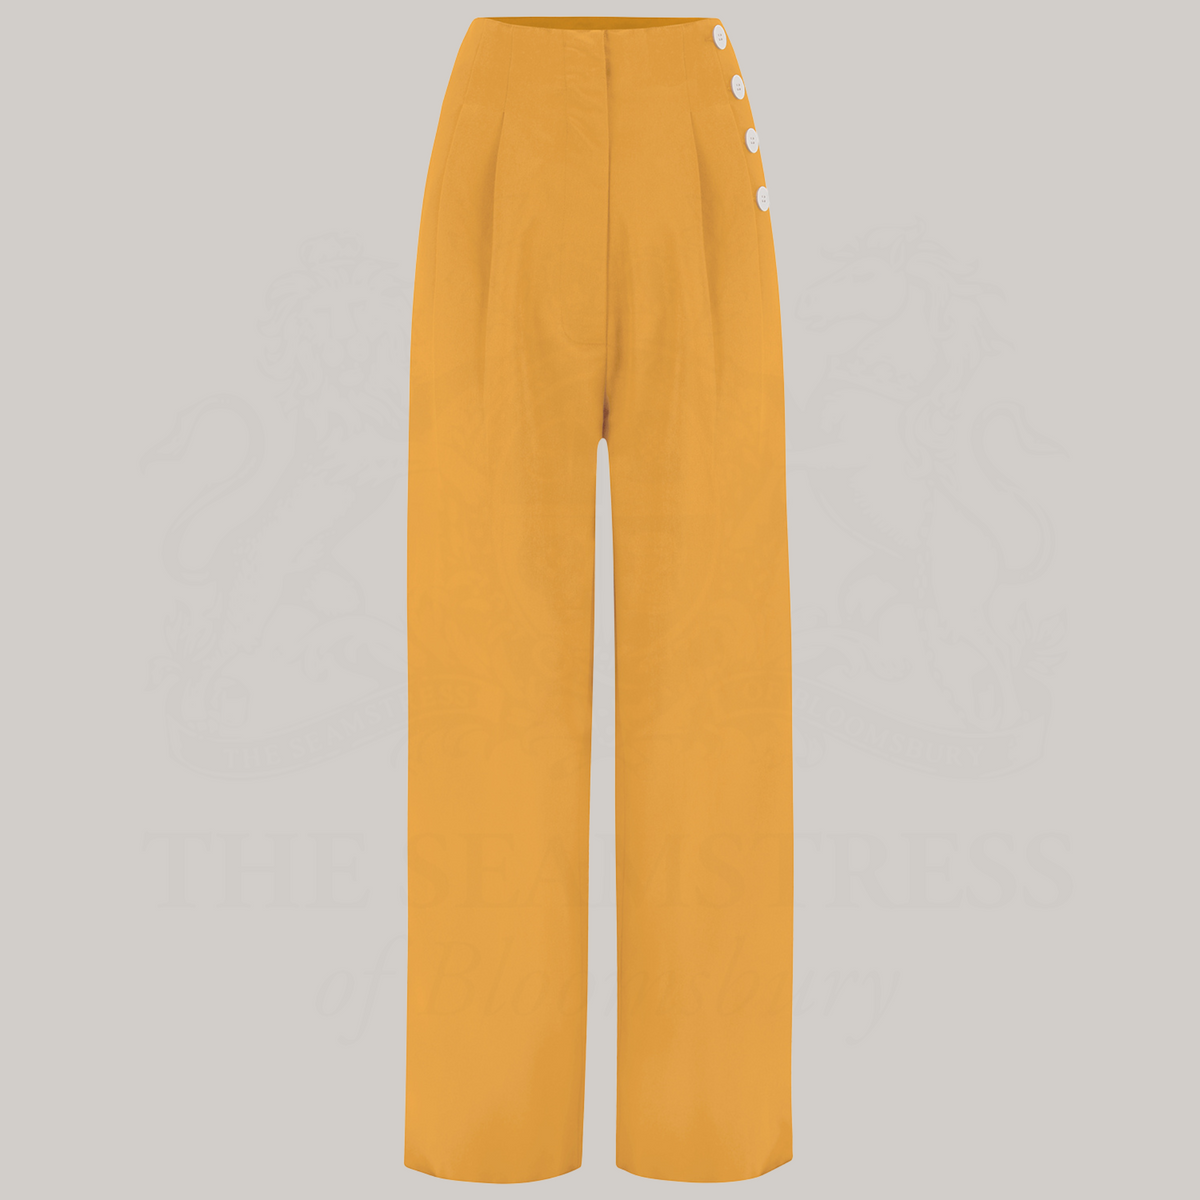 Audrey Trousers in Mustard